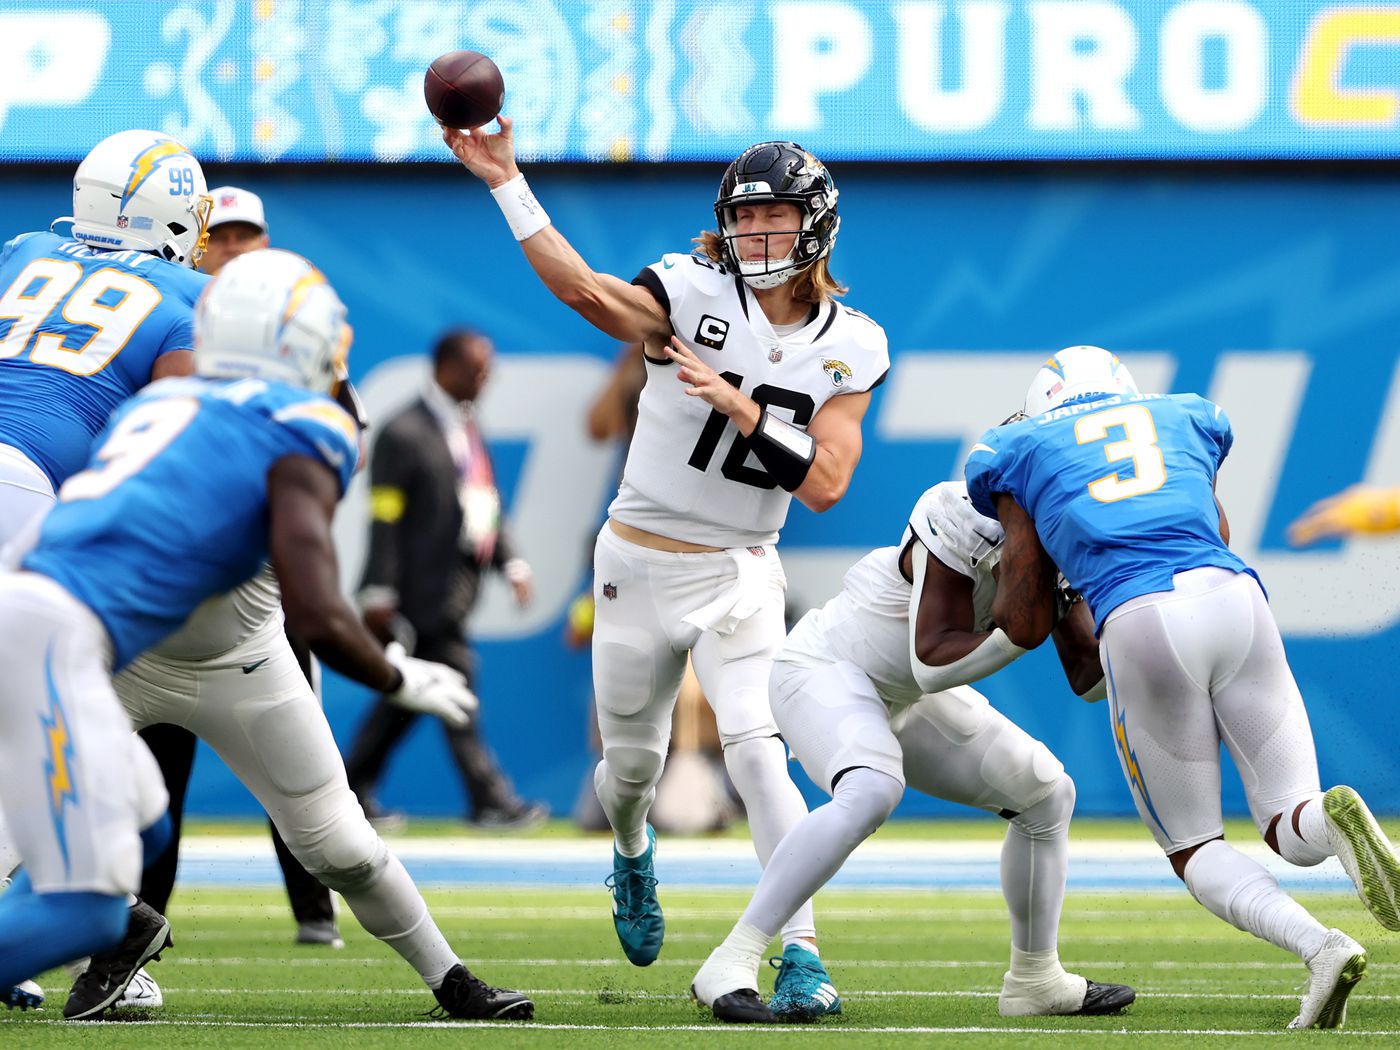 Jacksonville Jaguars go out west and dominate Los Angeles Chargers, 38-10 - Big Cat Country